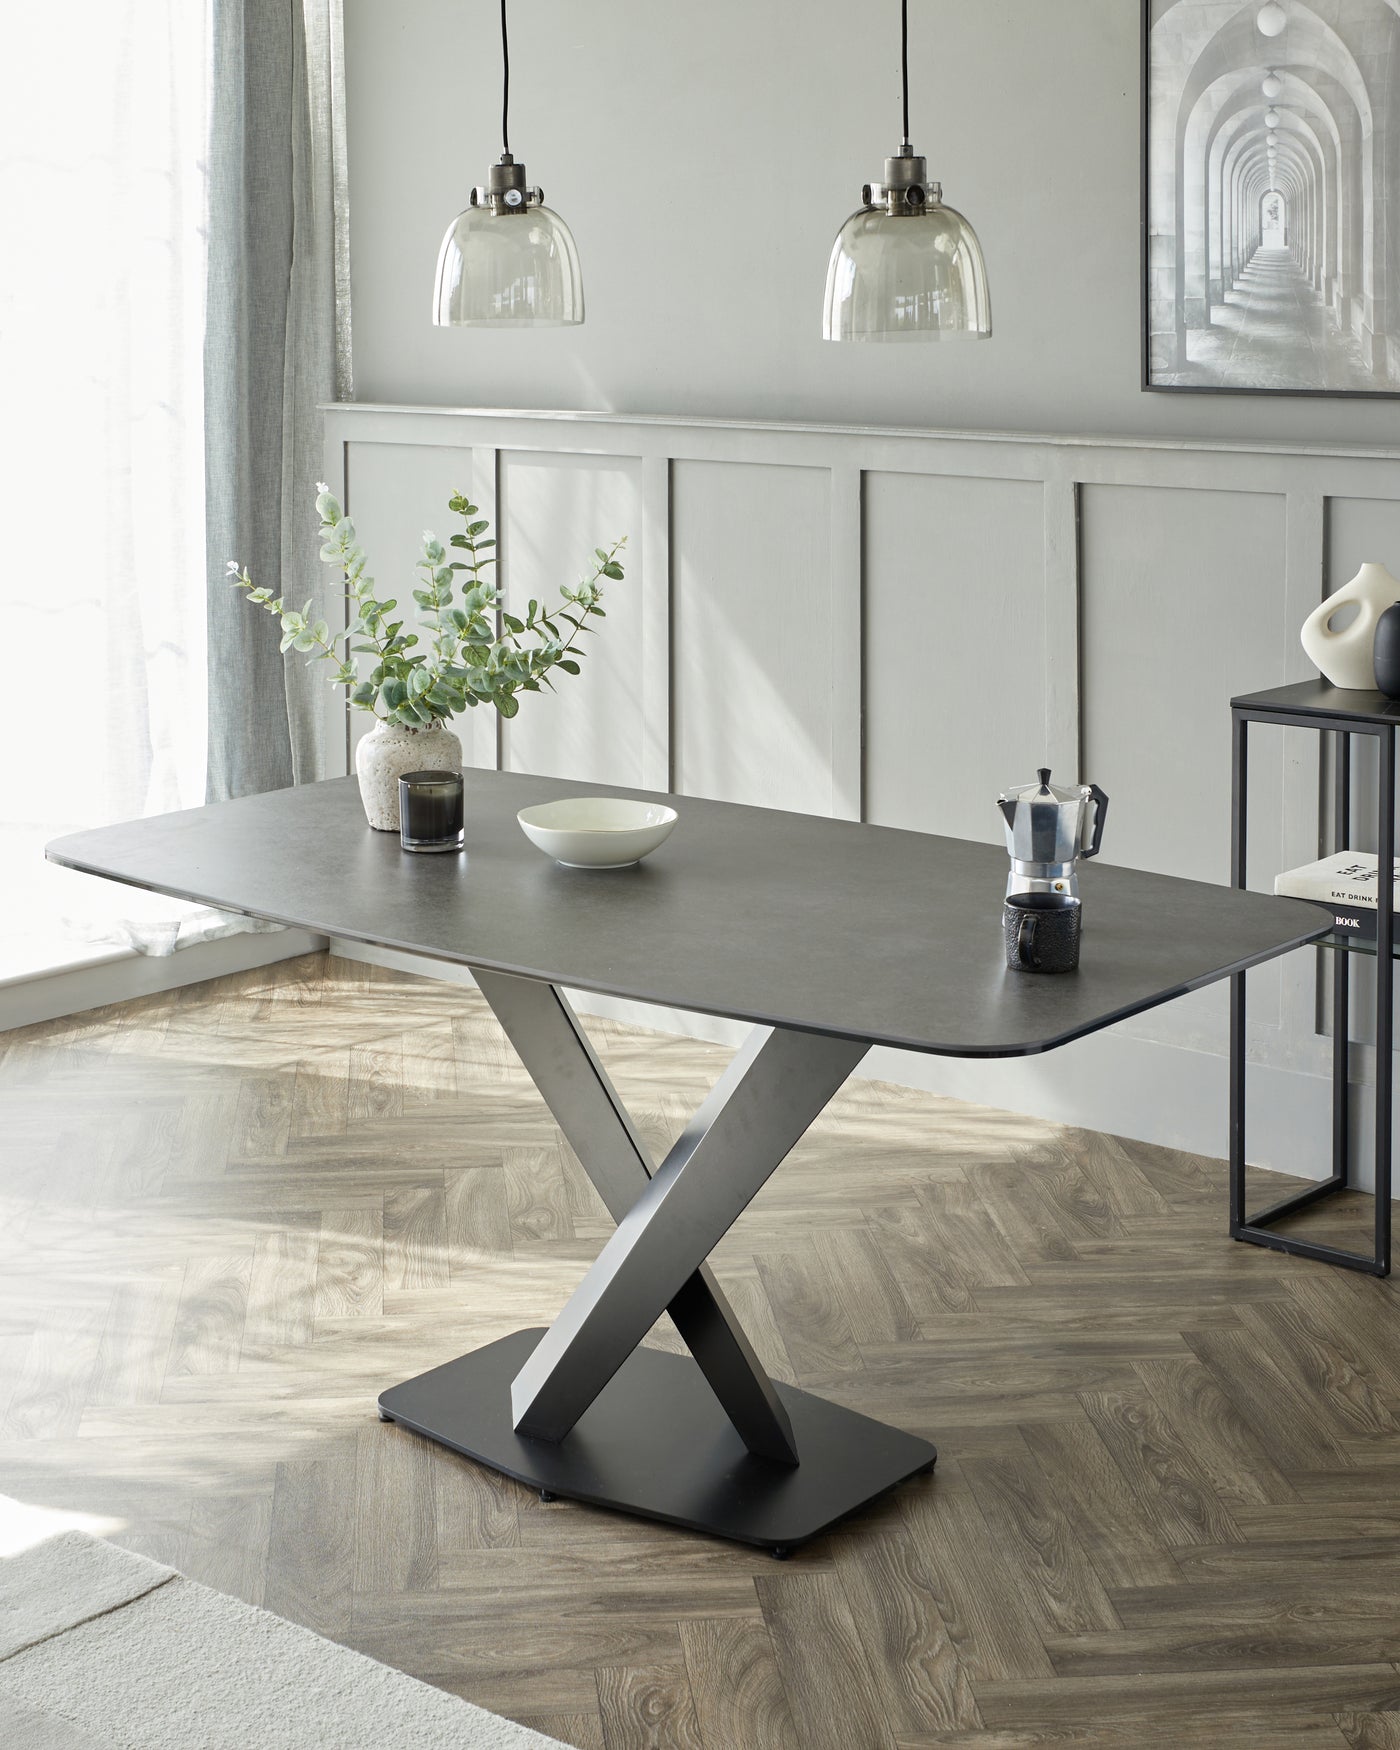 Modern dining table featuring a dark stone or concrete-style tabletop with bevelled edges and a unique, twisted X-shaped metallic base in a matte black finish. The table displays a minimalist aesthetic suitable for contemporary interior design spaces.